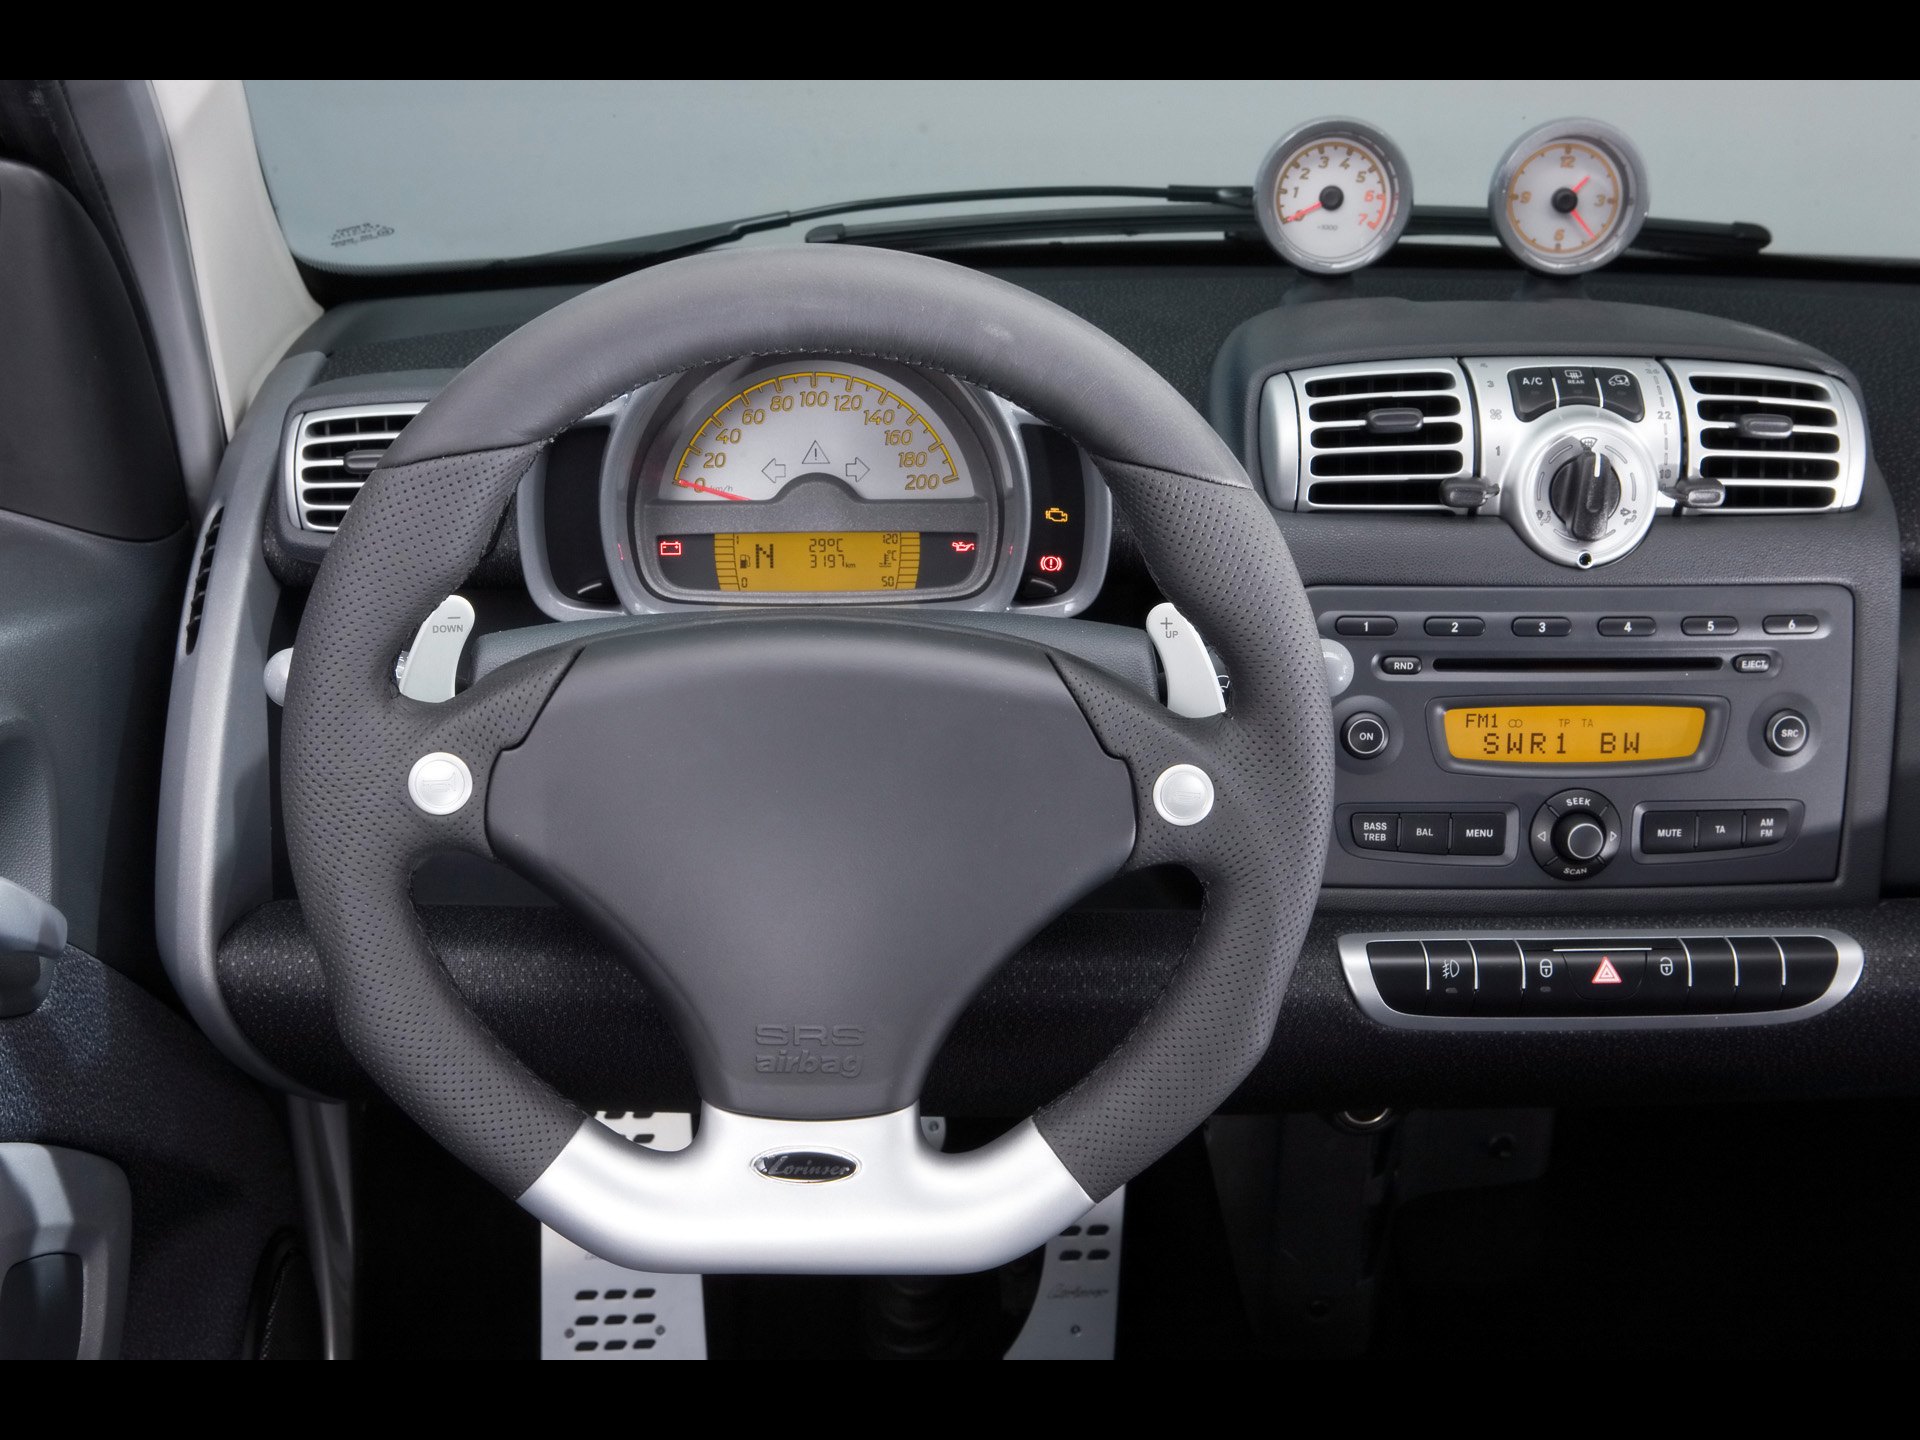 Smart Dashboard Wallpapers And Stock Photos - 2009 Smart Car Dashboard , HD Wallpaper & Backgrounds